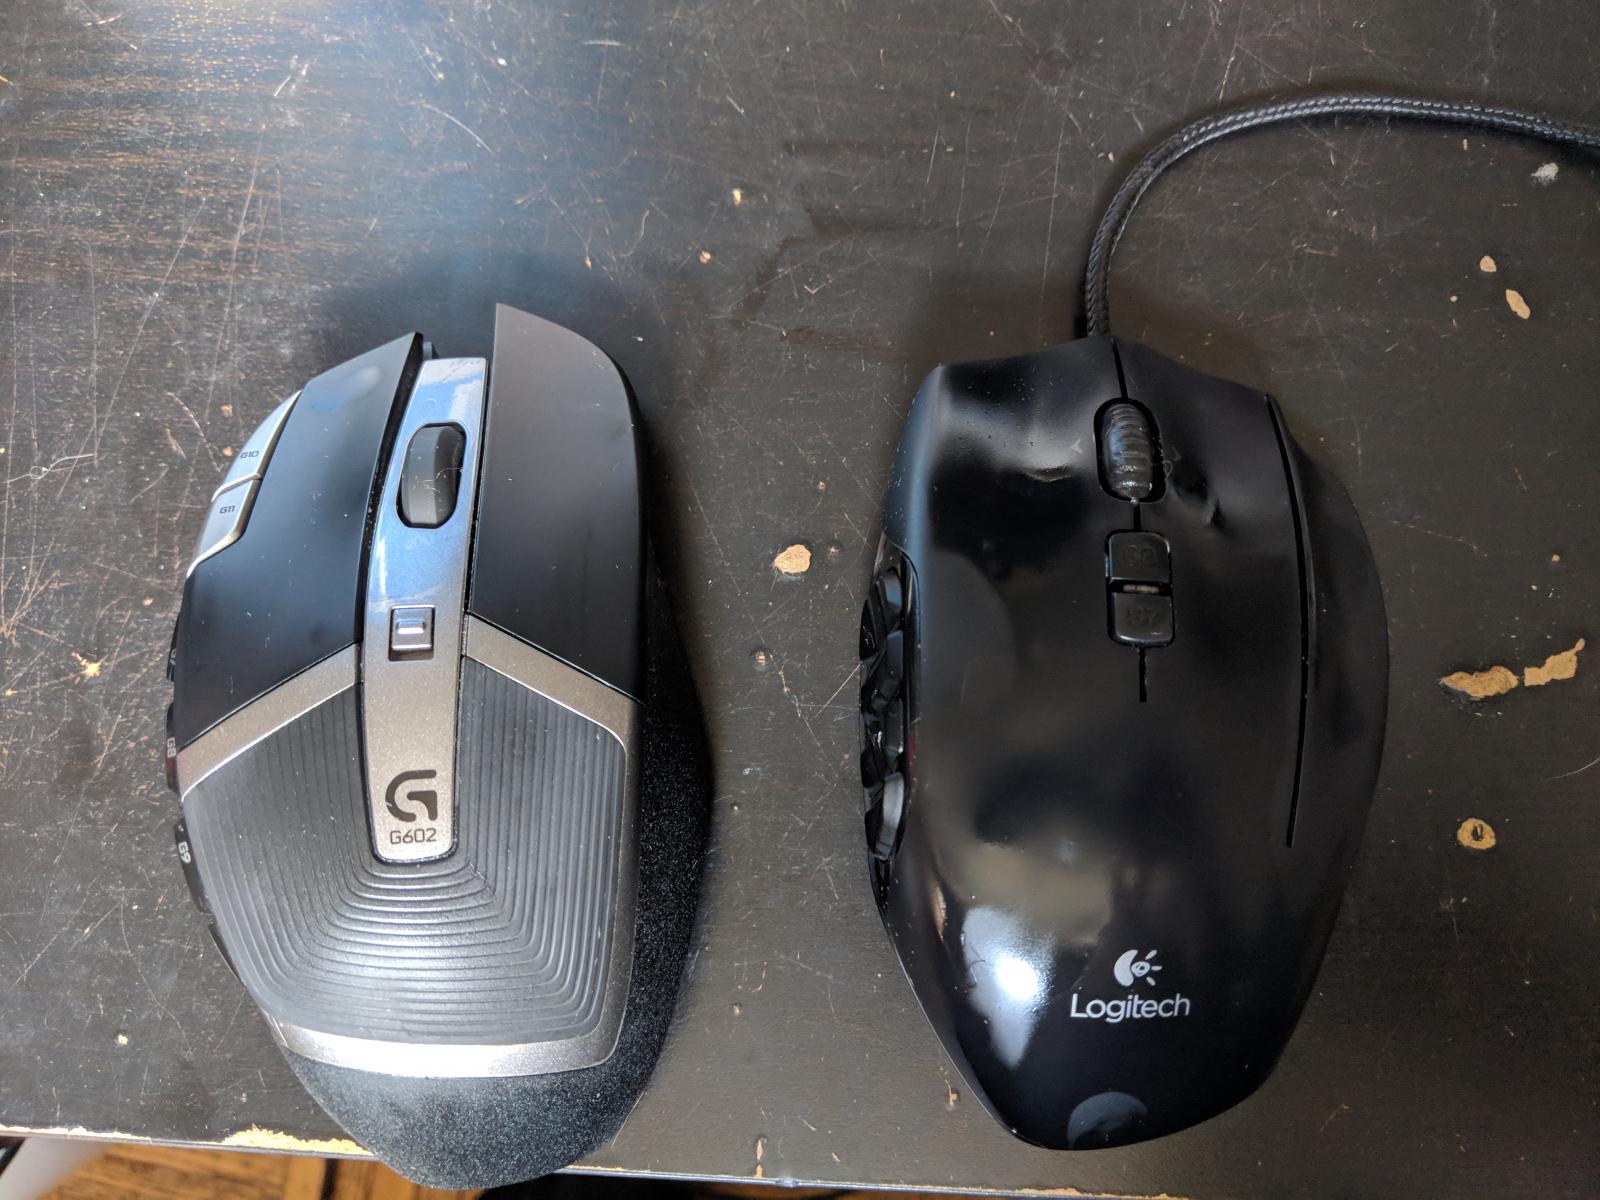 For sale Logitech G602 Wireless Gaming Mouse